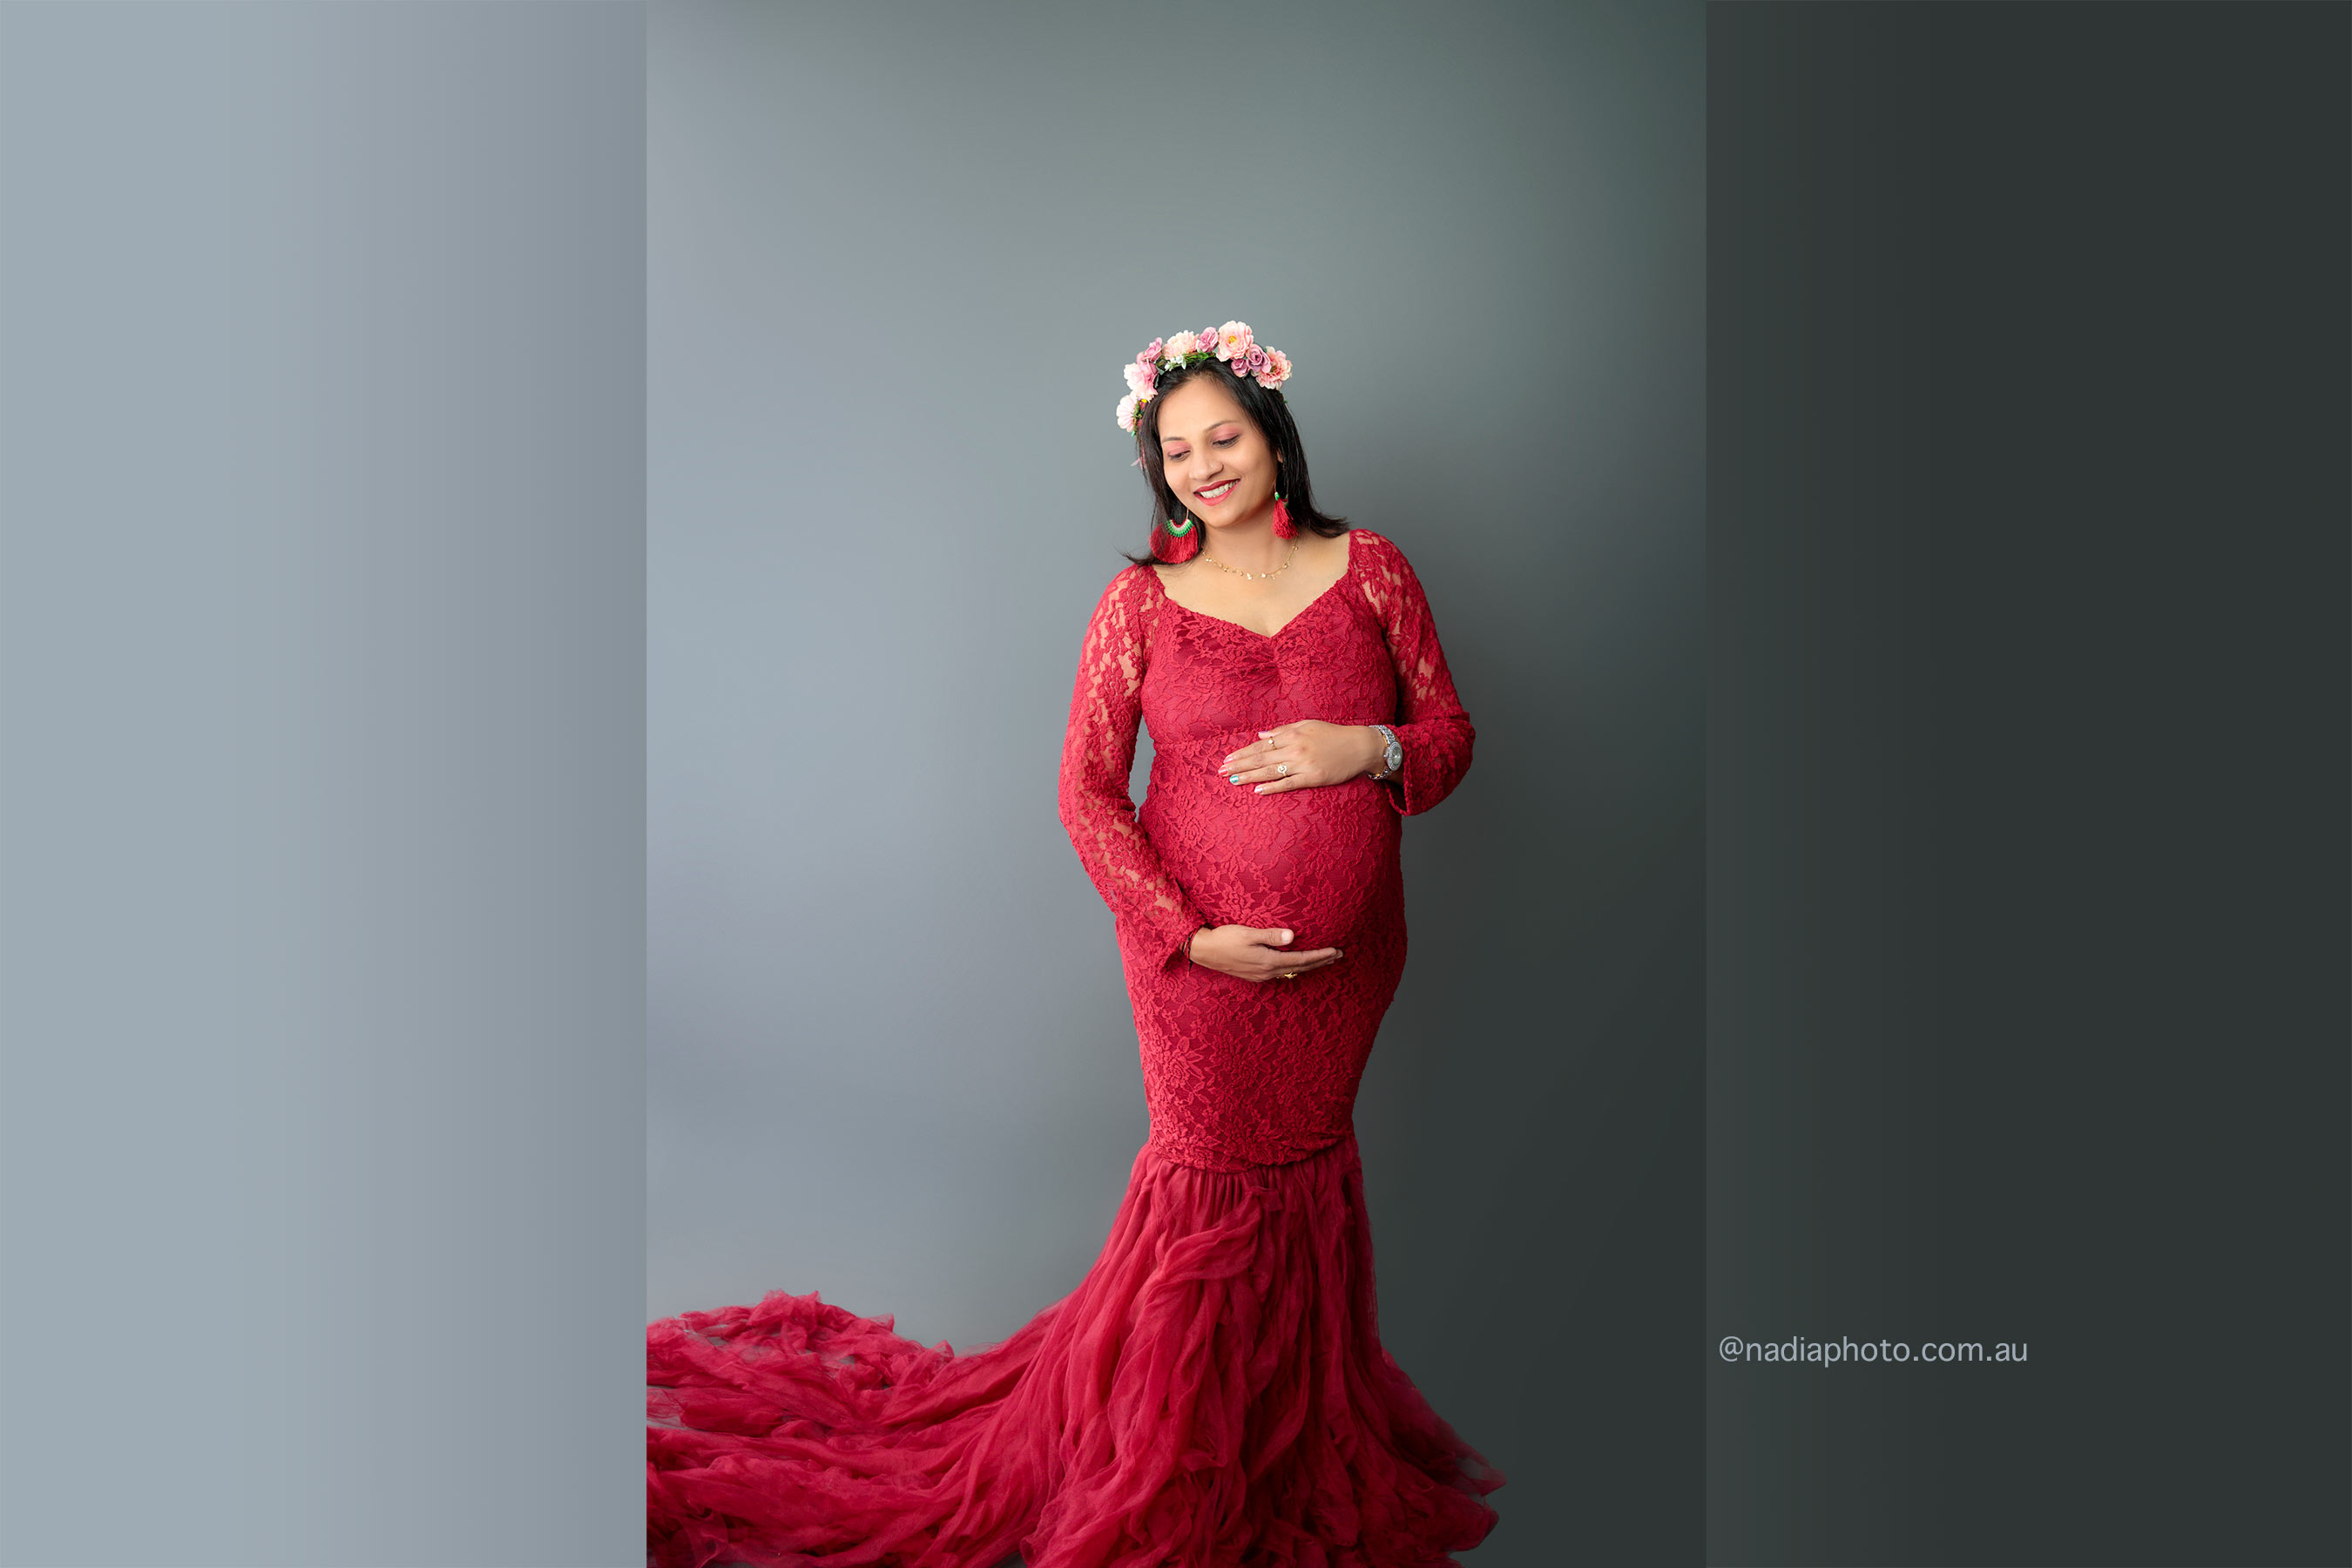 Maternity photoshoot in our studio